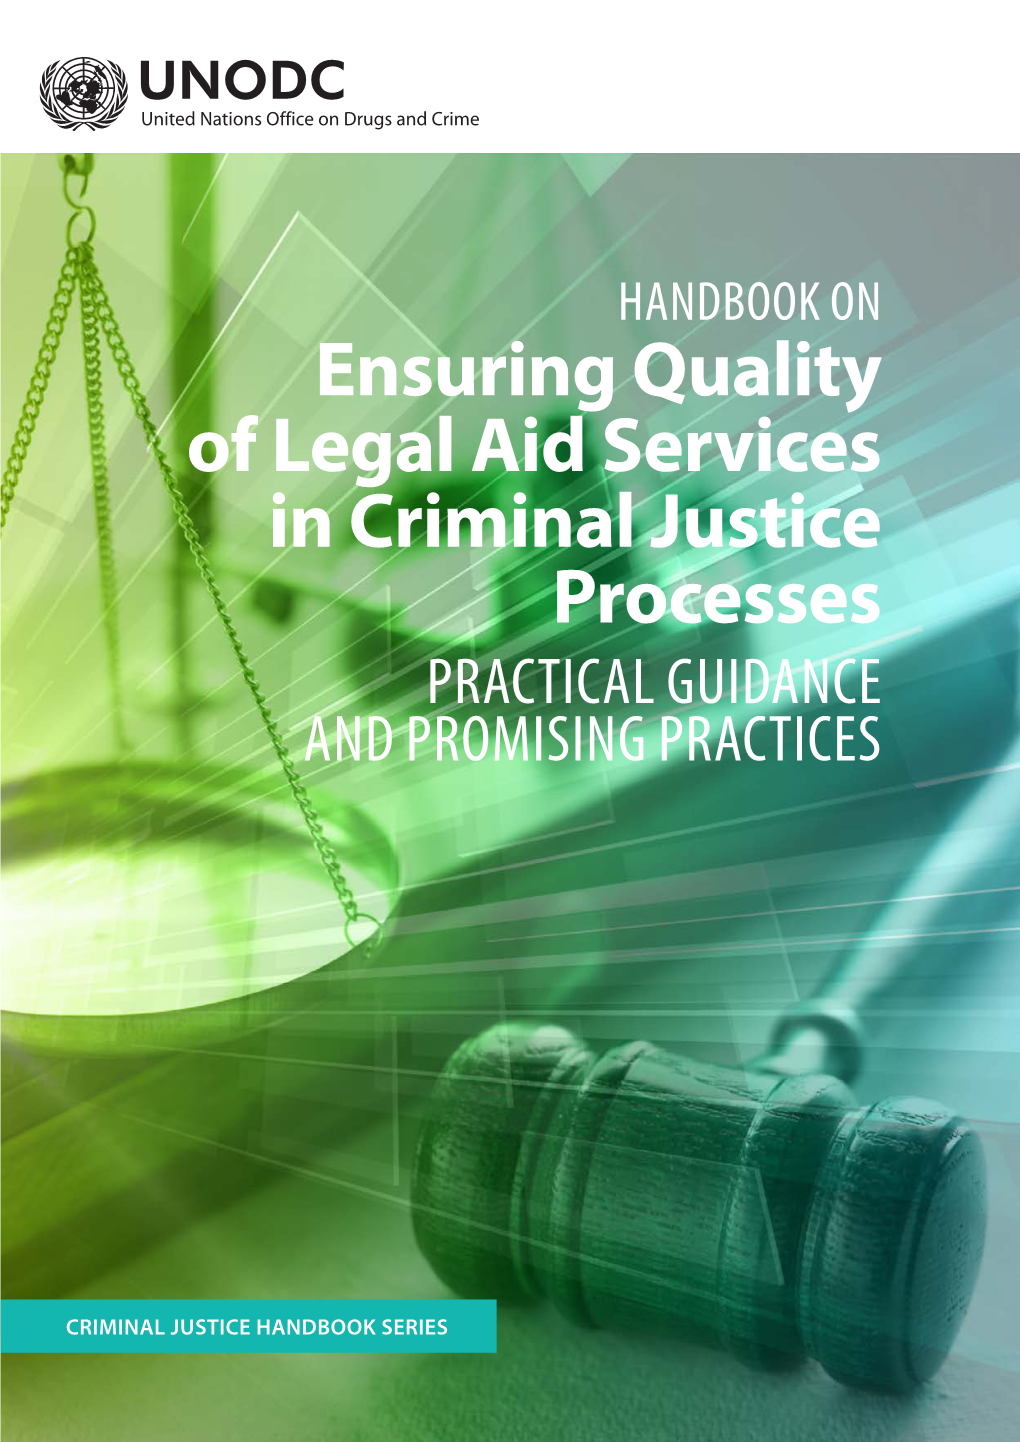 HANDBOOK on Ensuring Quality of Legal Aid Services in Criminal Justice Processes PRACTICAL GUIDANCE and PROMISING PRACTICES